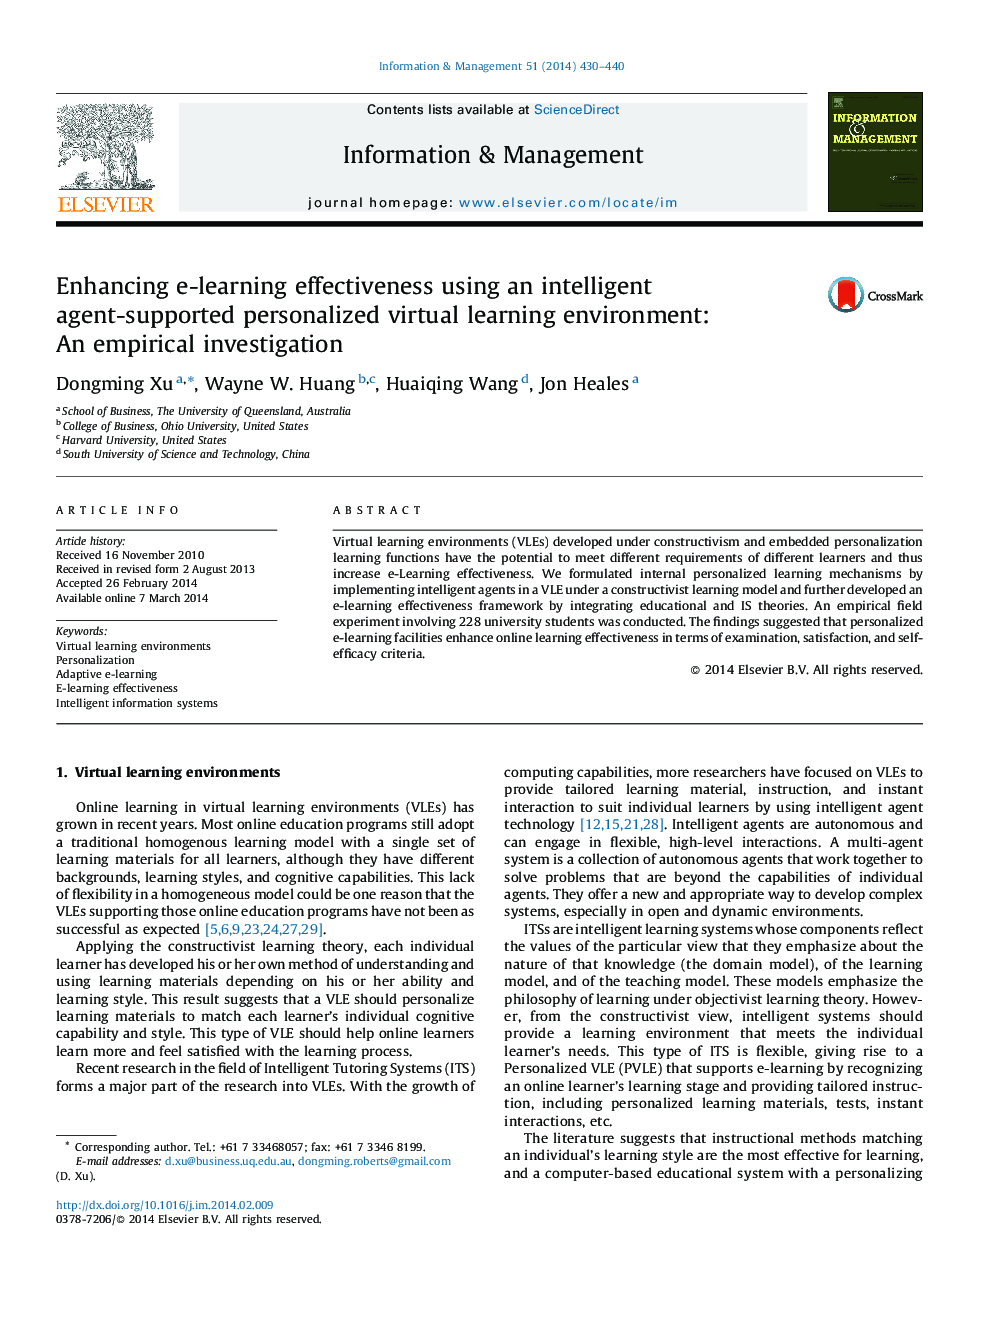 Enhancing e-learning effectiveness using an intelligent agent-supported personalized virtual learning environment: An empirical investigation